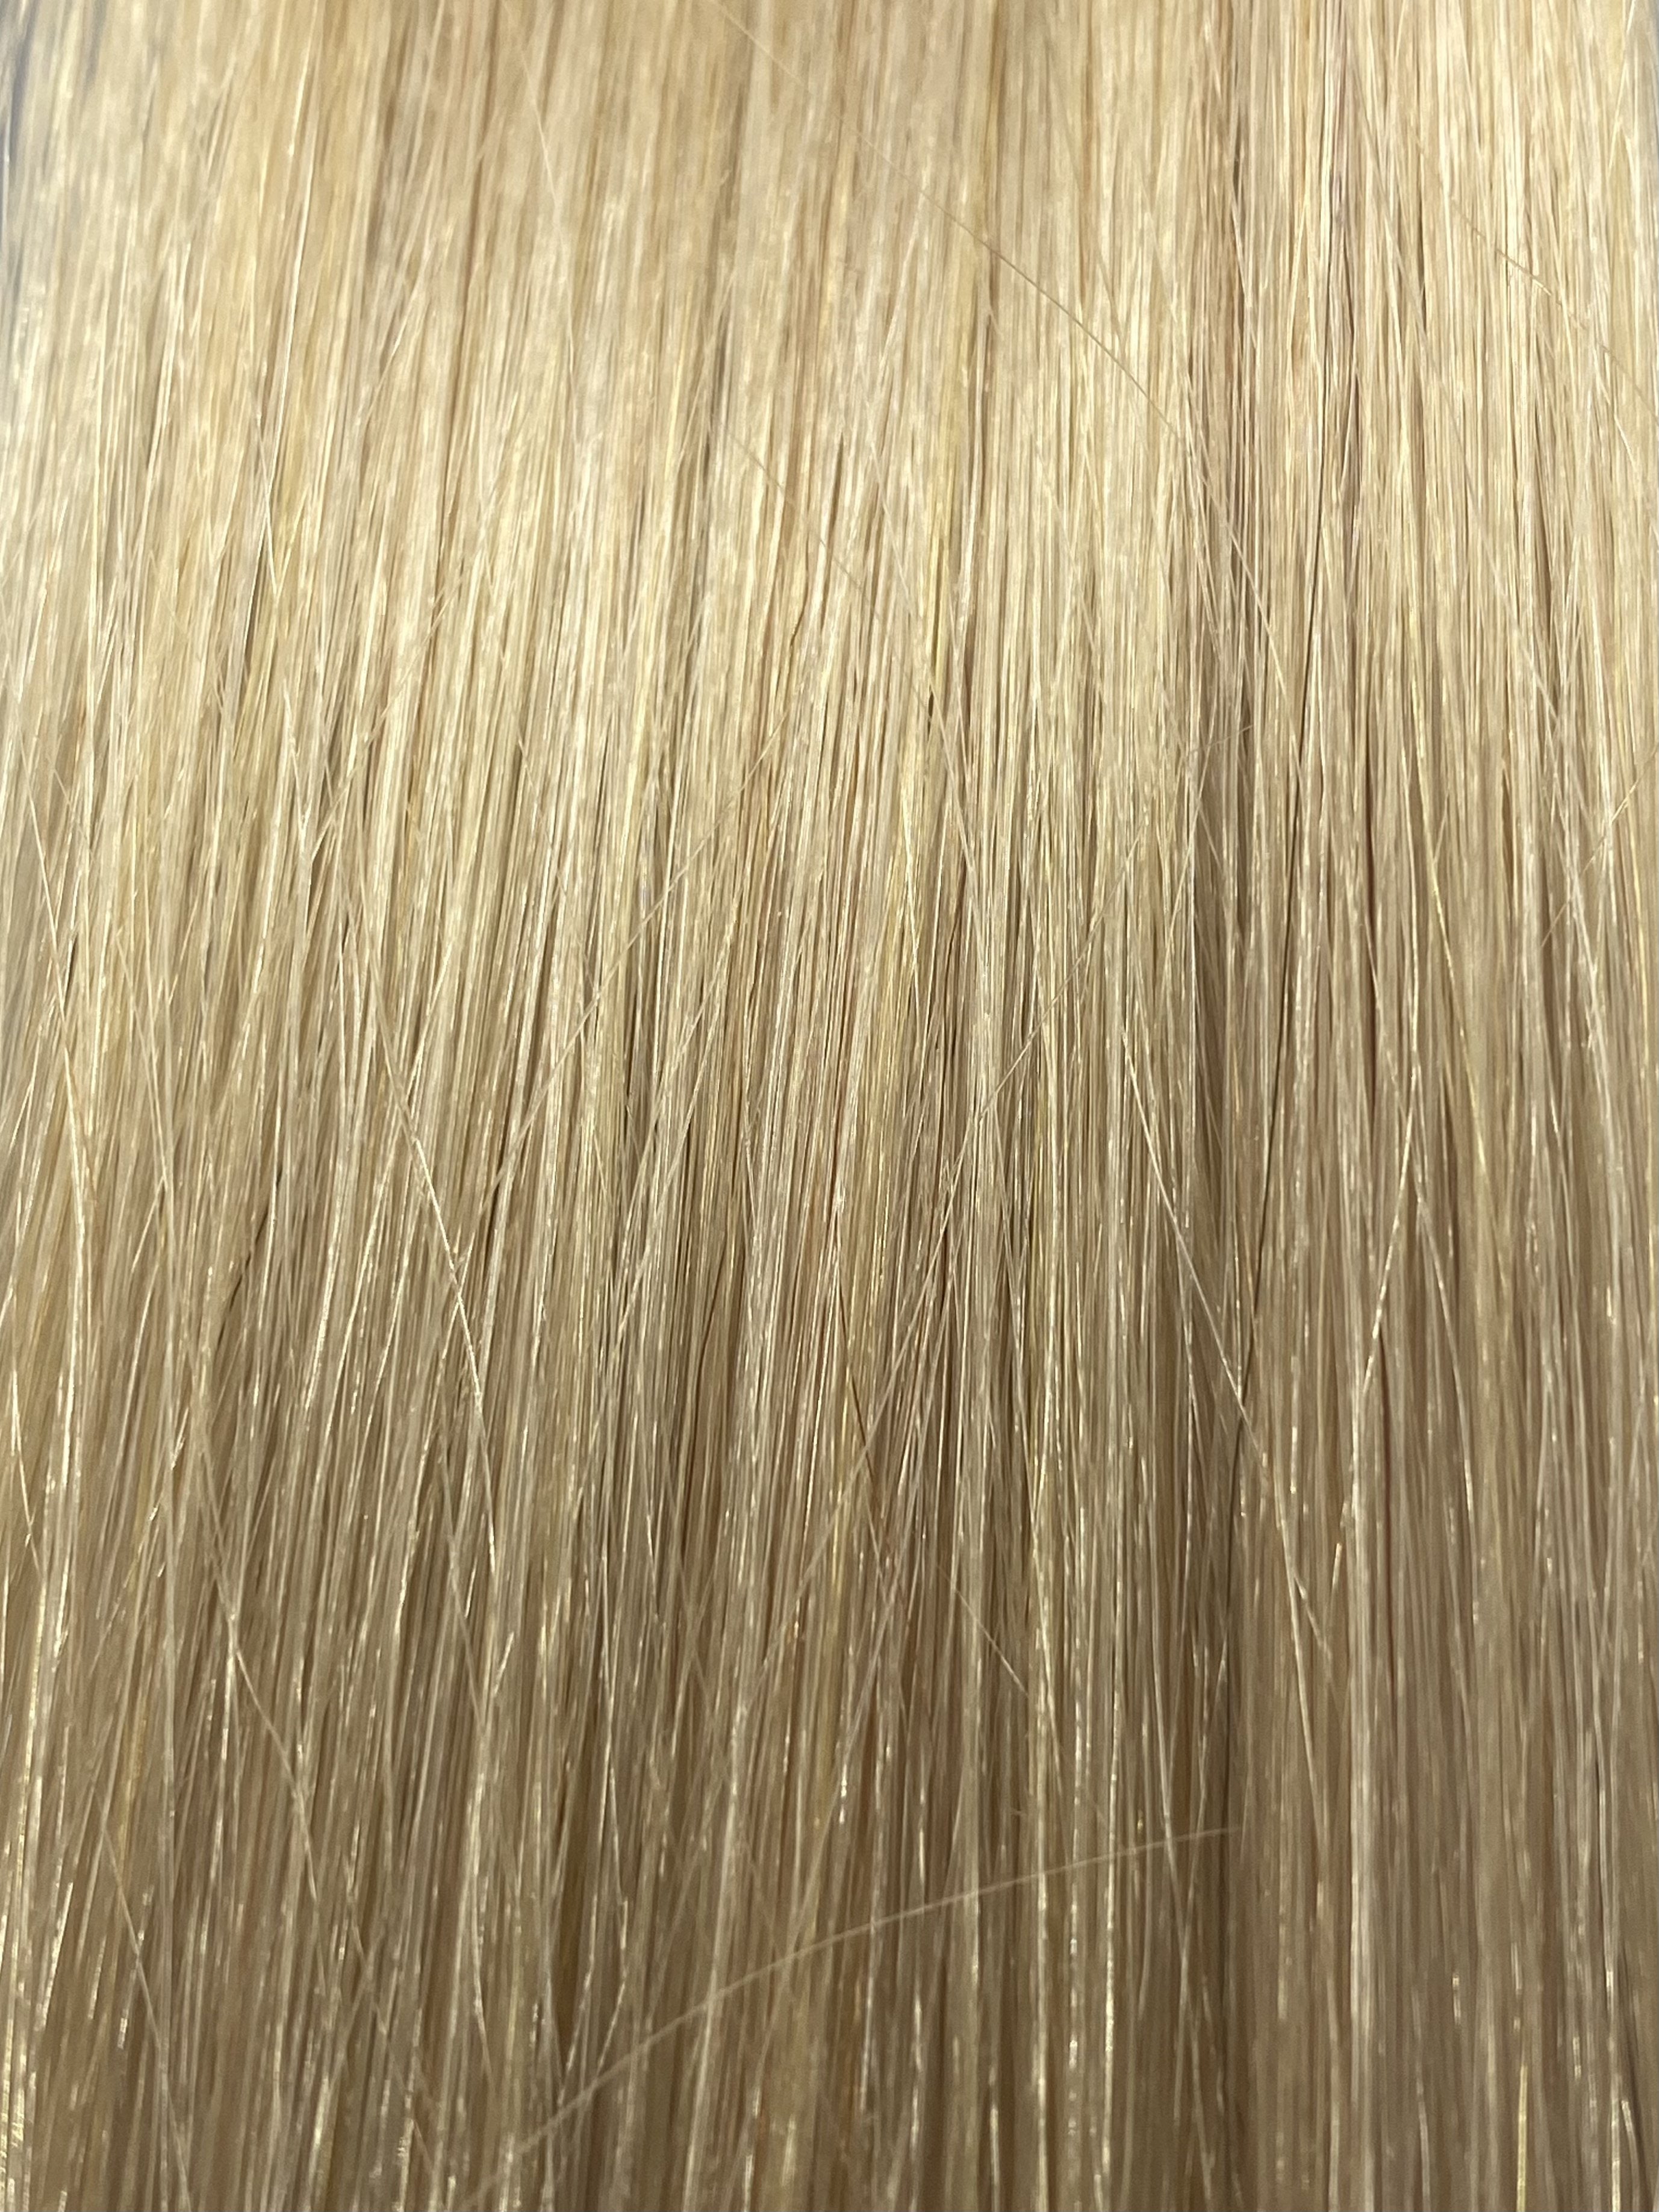 FUSION #1002 VERY LIGHT ASH BLONDE 40CM/ 16 INCHES  - 17.5 GRAMS